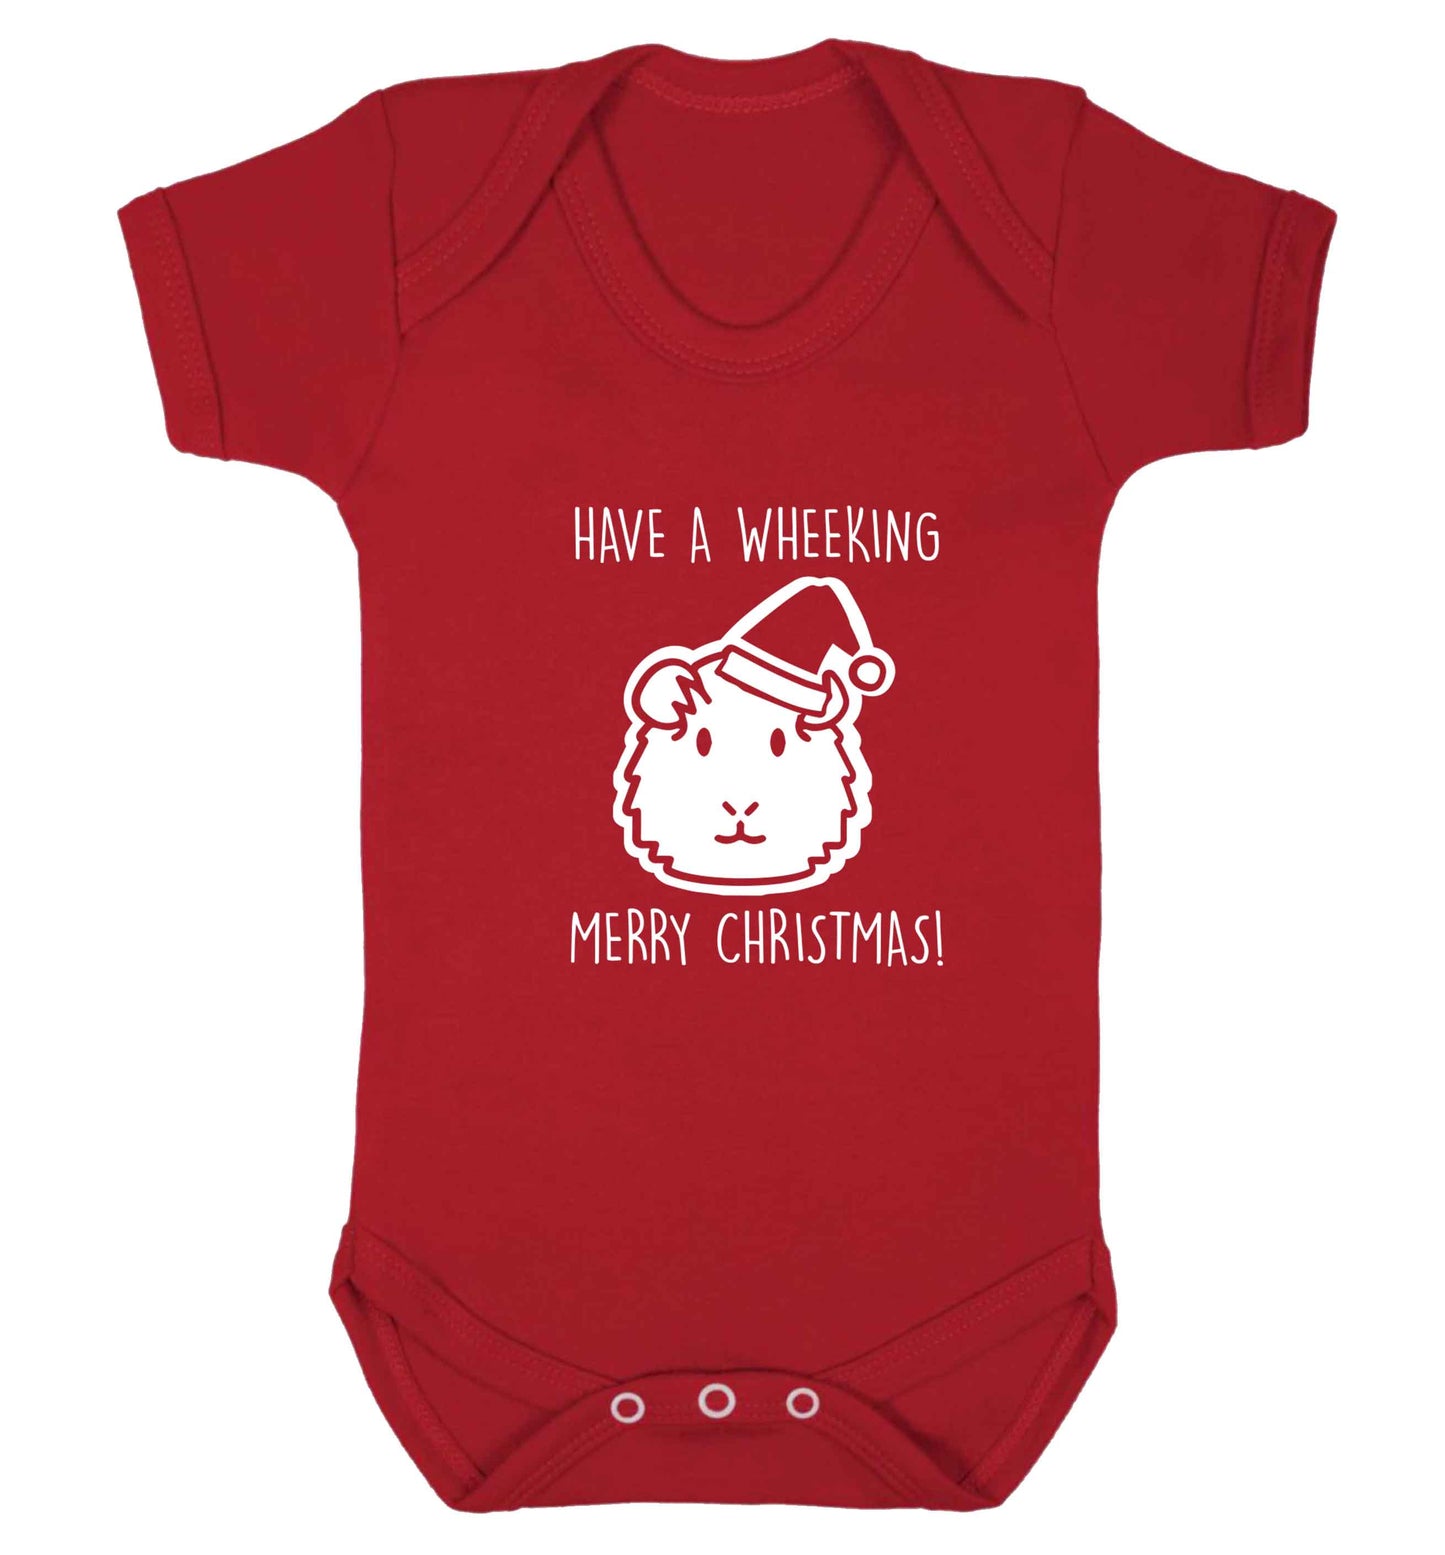 Have a wheeking merry Christmas baby vest red 18-24 months